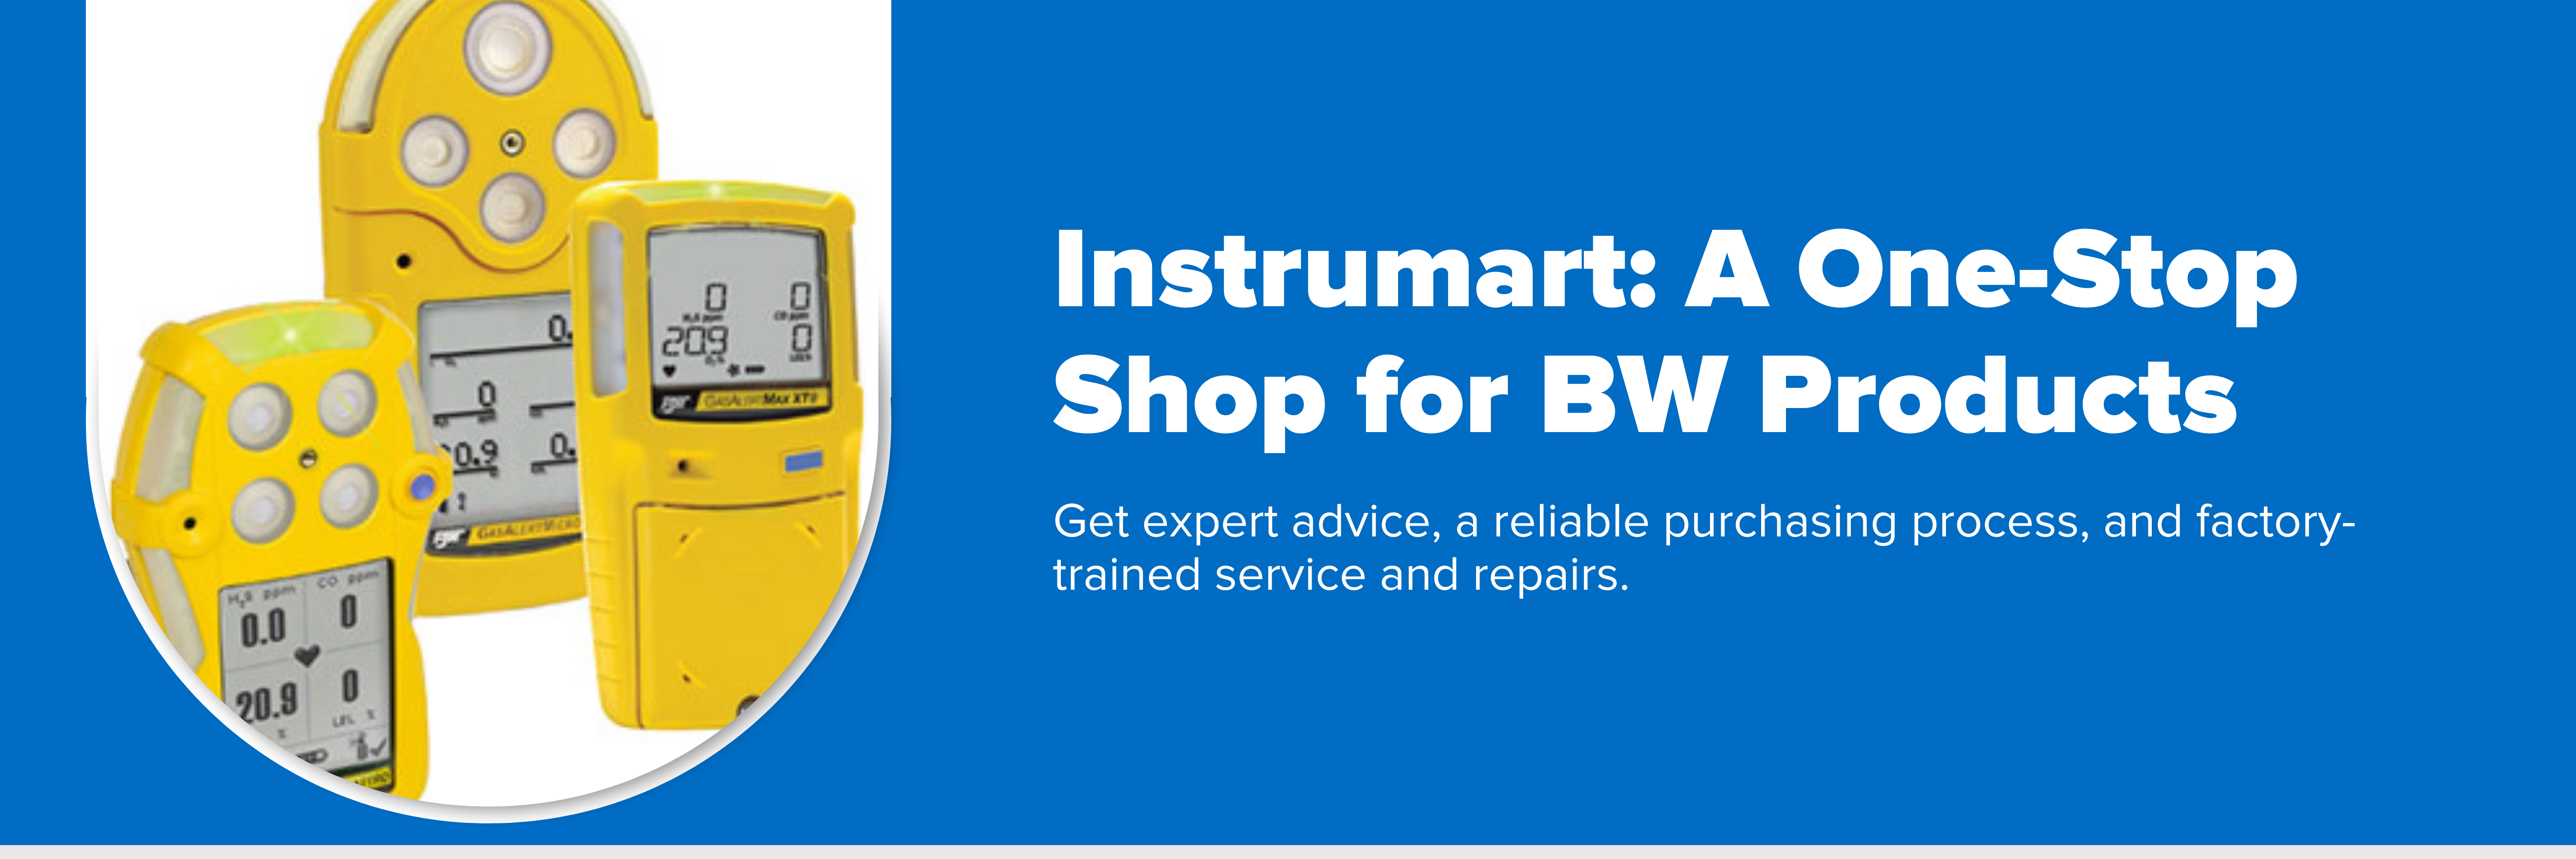 Header image with text "Instrumart: A One-Stop Shop for BW Products"